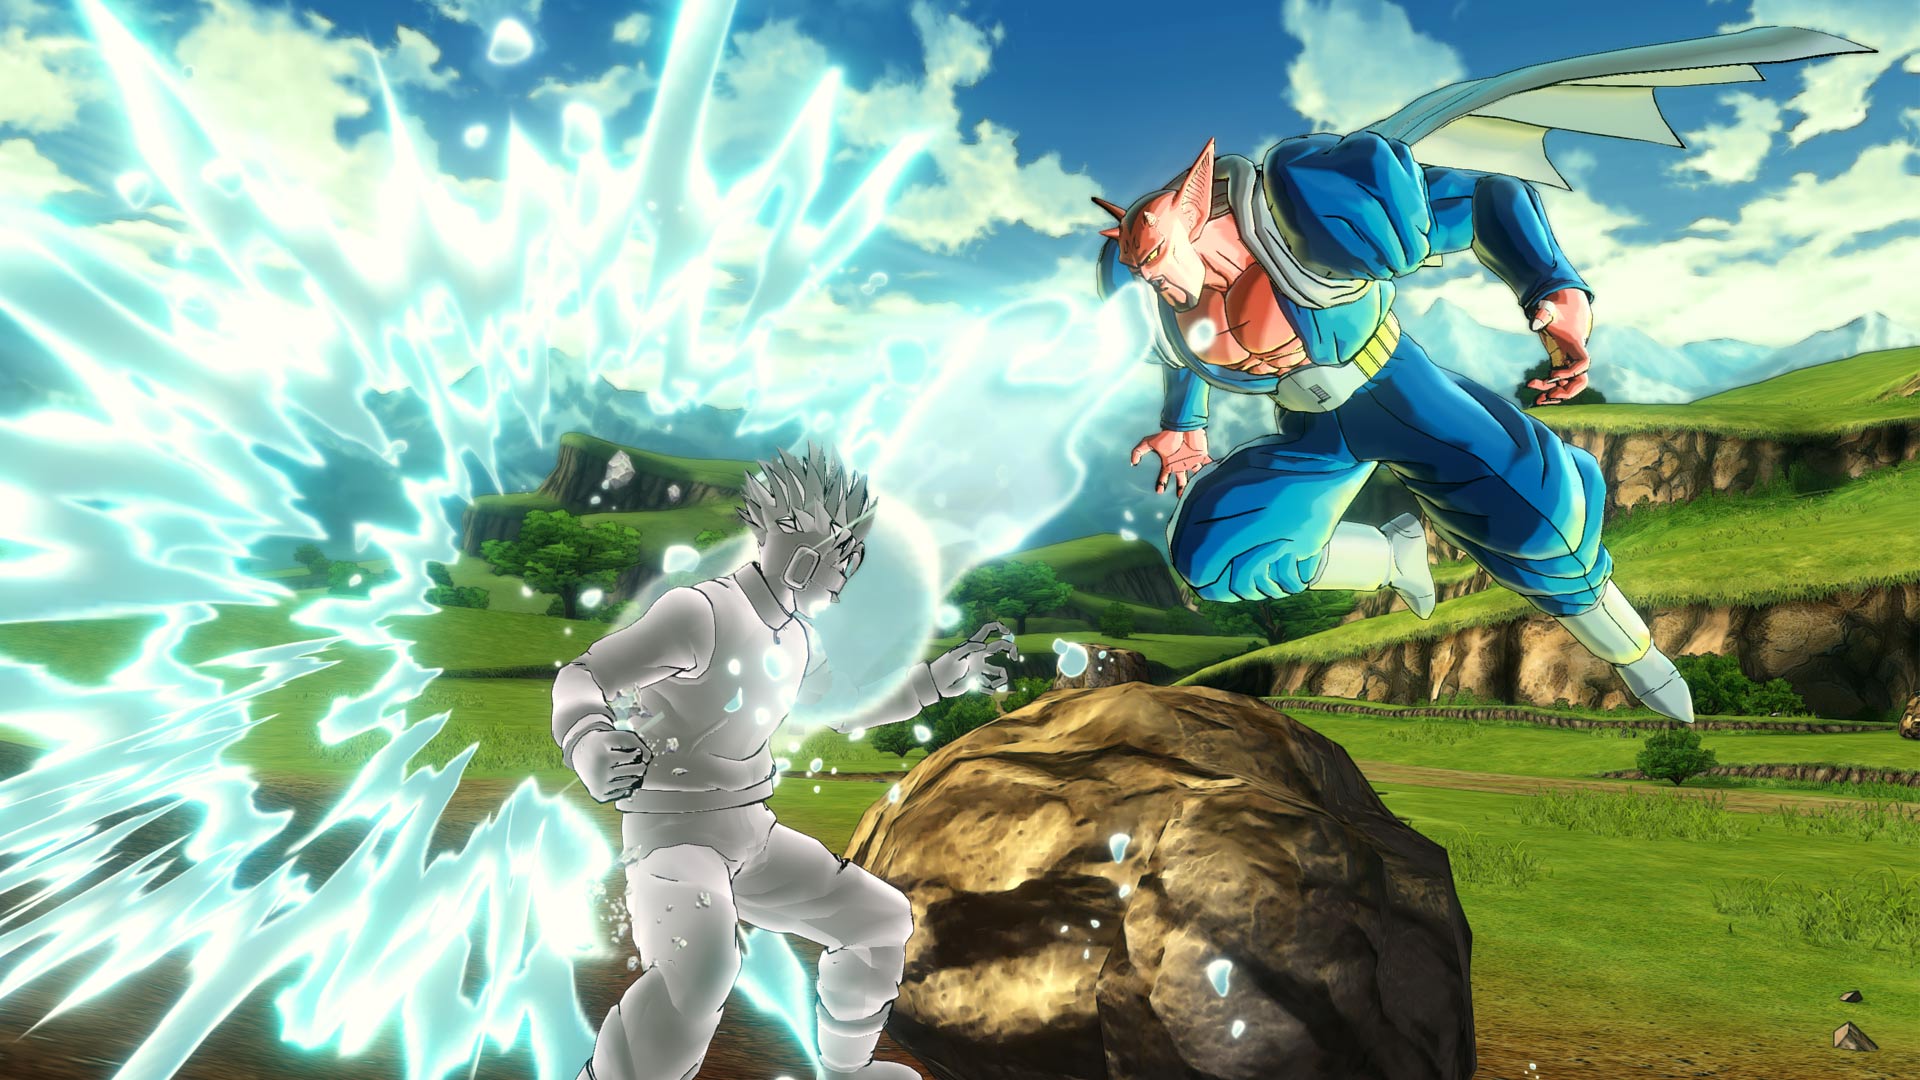 DRAGON BALL XENOVERSE 2 - Extra DLC Pack 4 on Steam